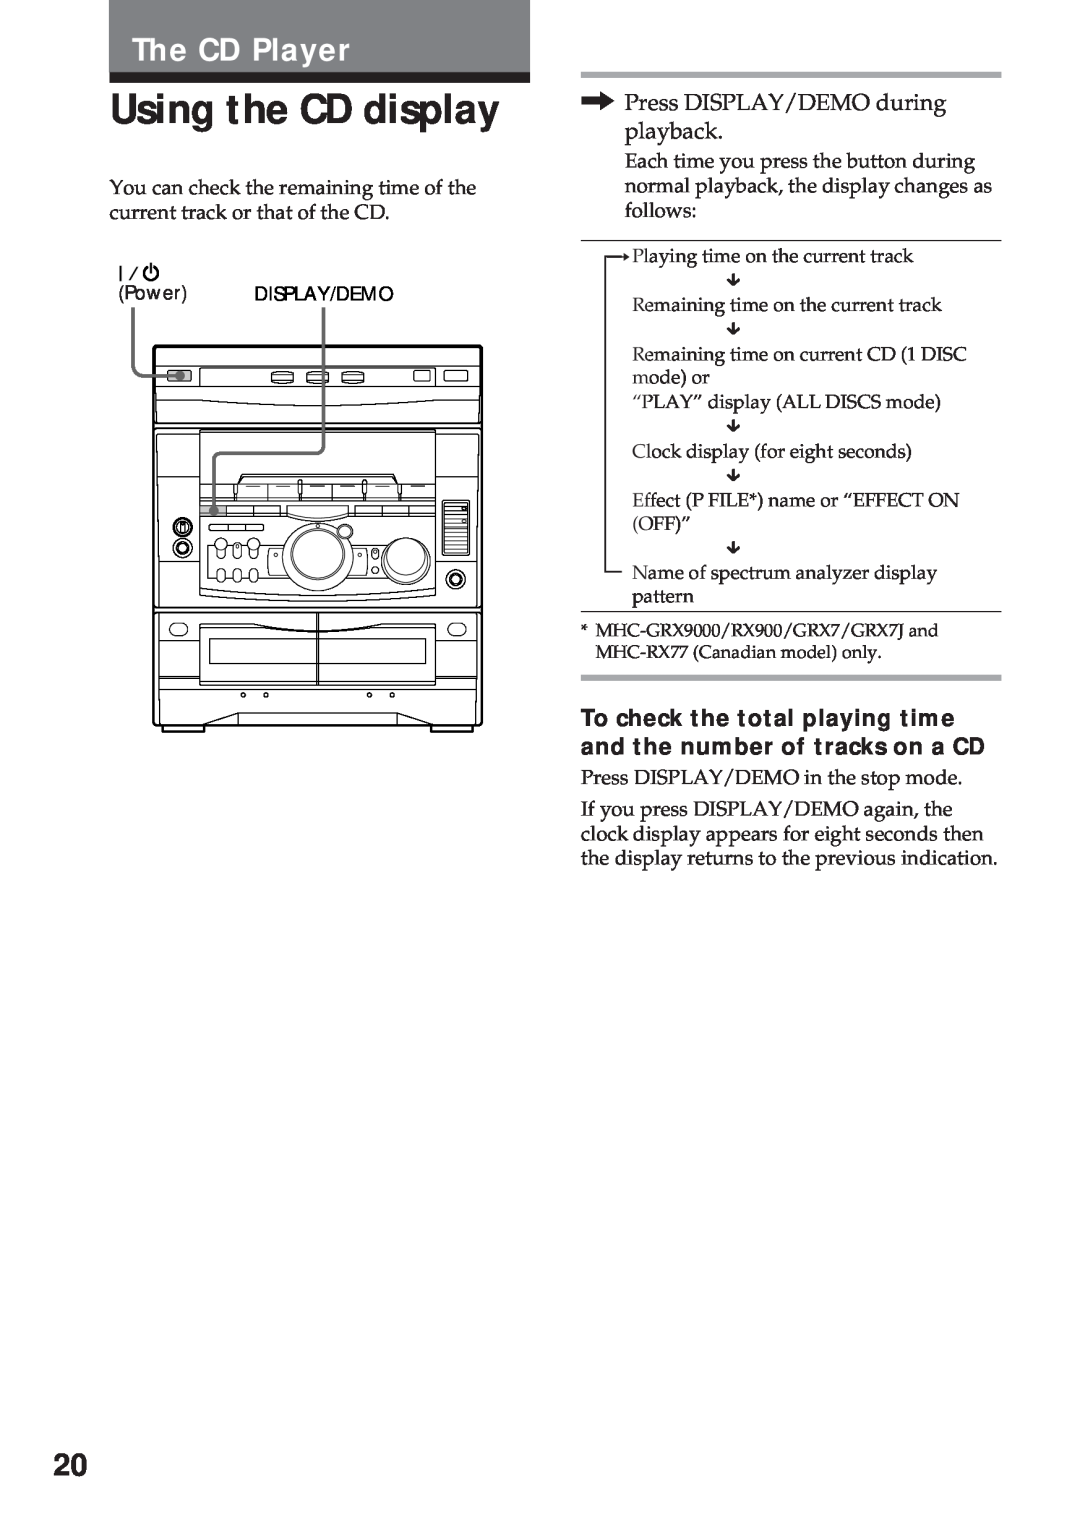 Sony MHC-RX900 manual Using the CD display, The CD Player, Press DISPLAY/DEMO during playback 